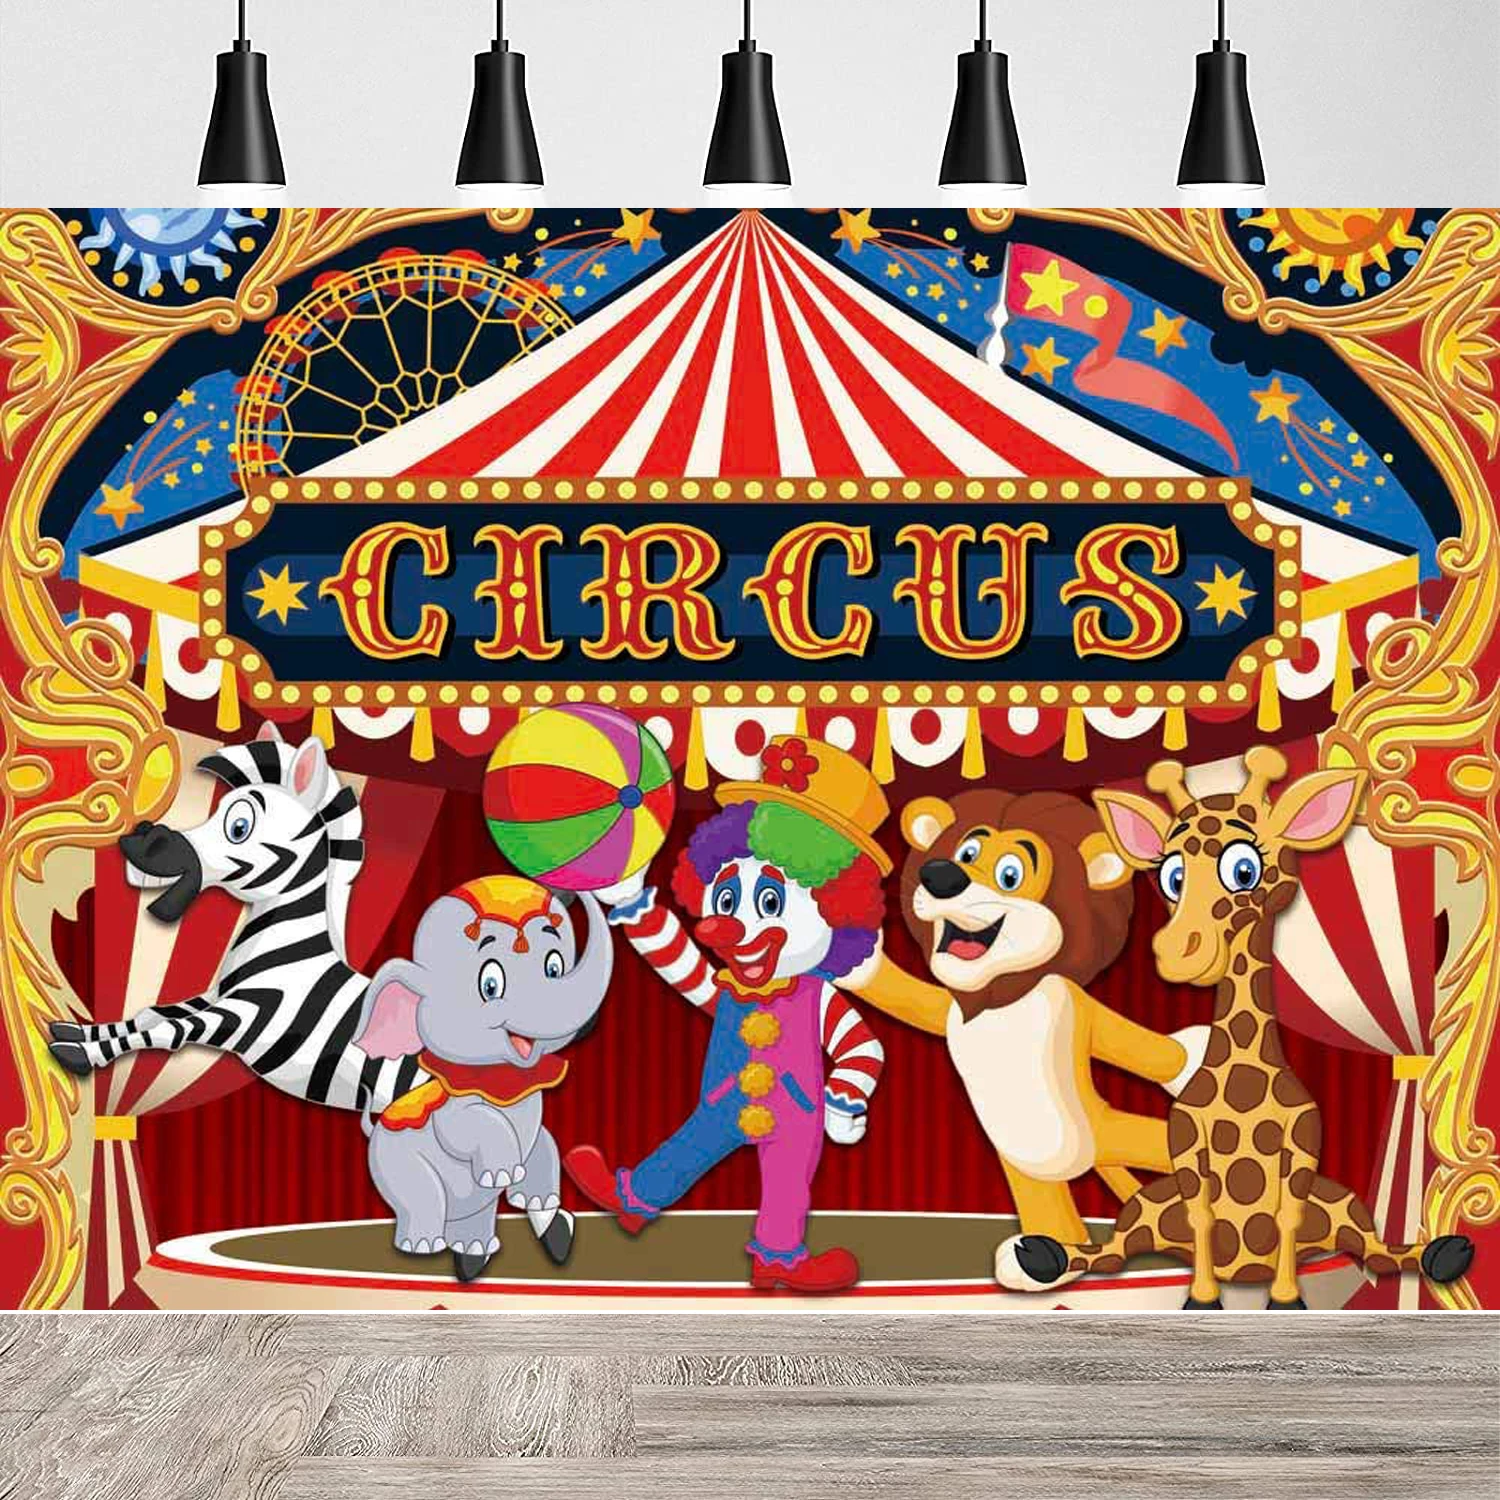 Circus Photography Backdrop Birthday Banner Photo Baby Shower Party  Supplies Theater Jokes Clown Background Decorations - Backgrounds -  AliExpress